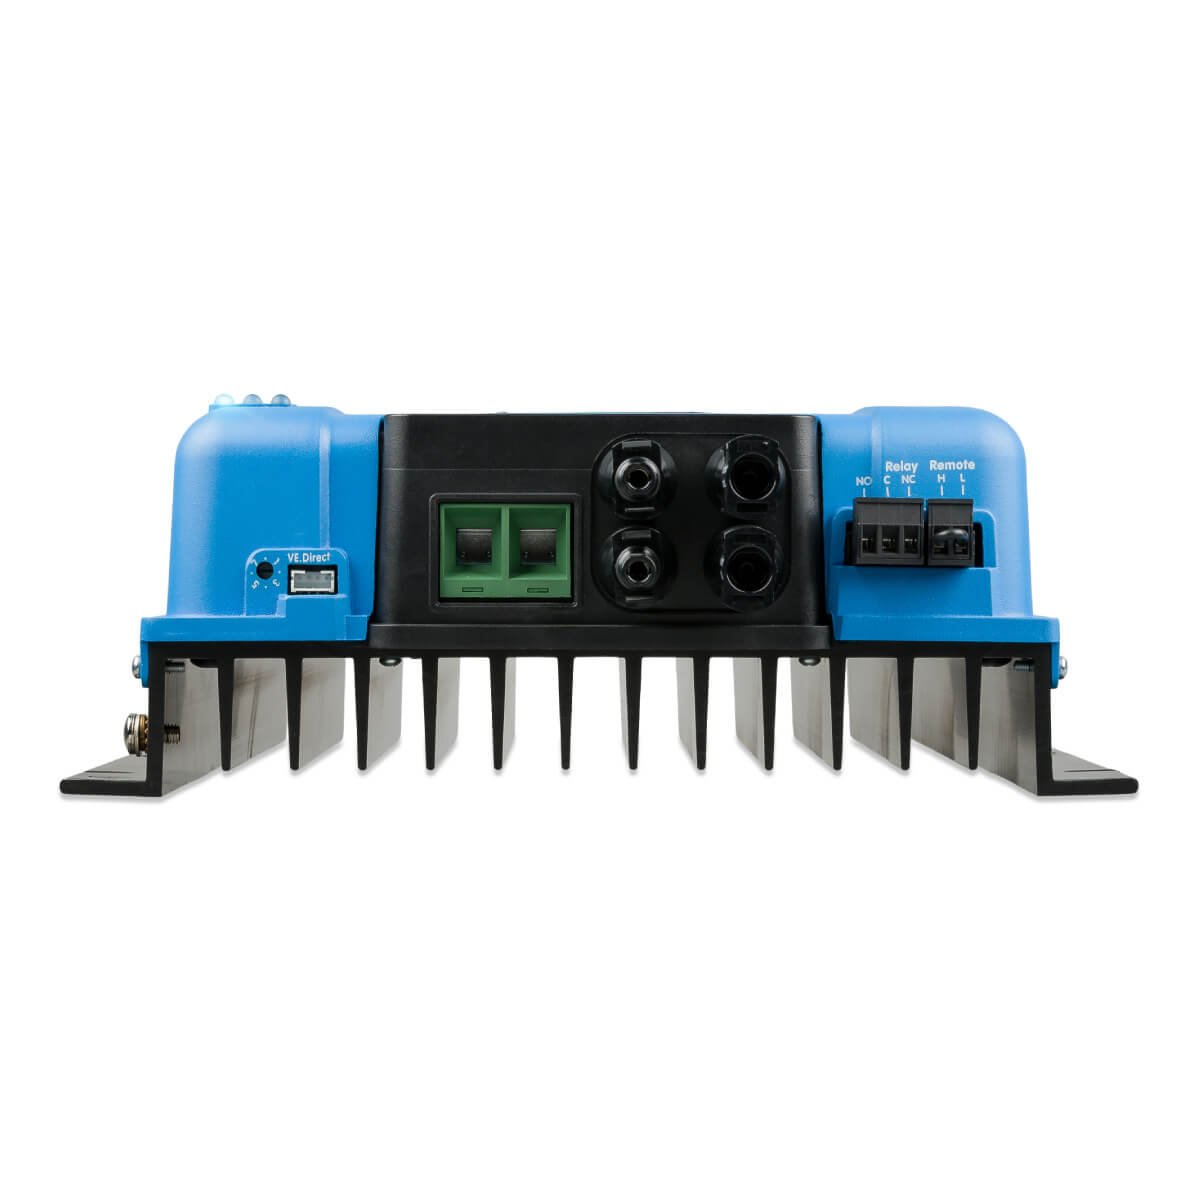 The Victron MPPT 250/60 - SmartSolar Charge Controller - MC4 features heatsink fins, multiple connectors, and ports on its front panel.